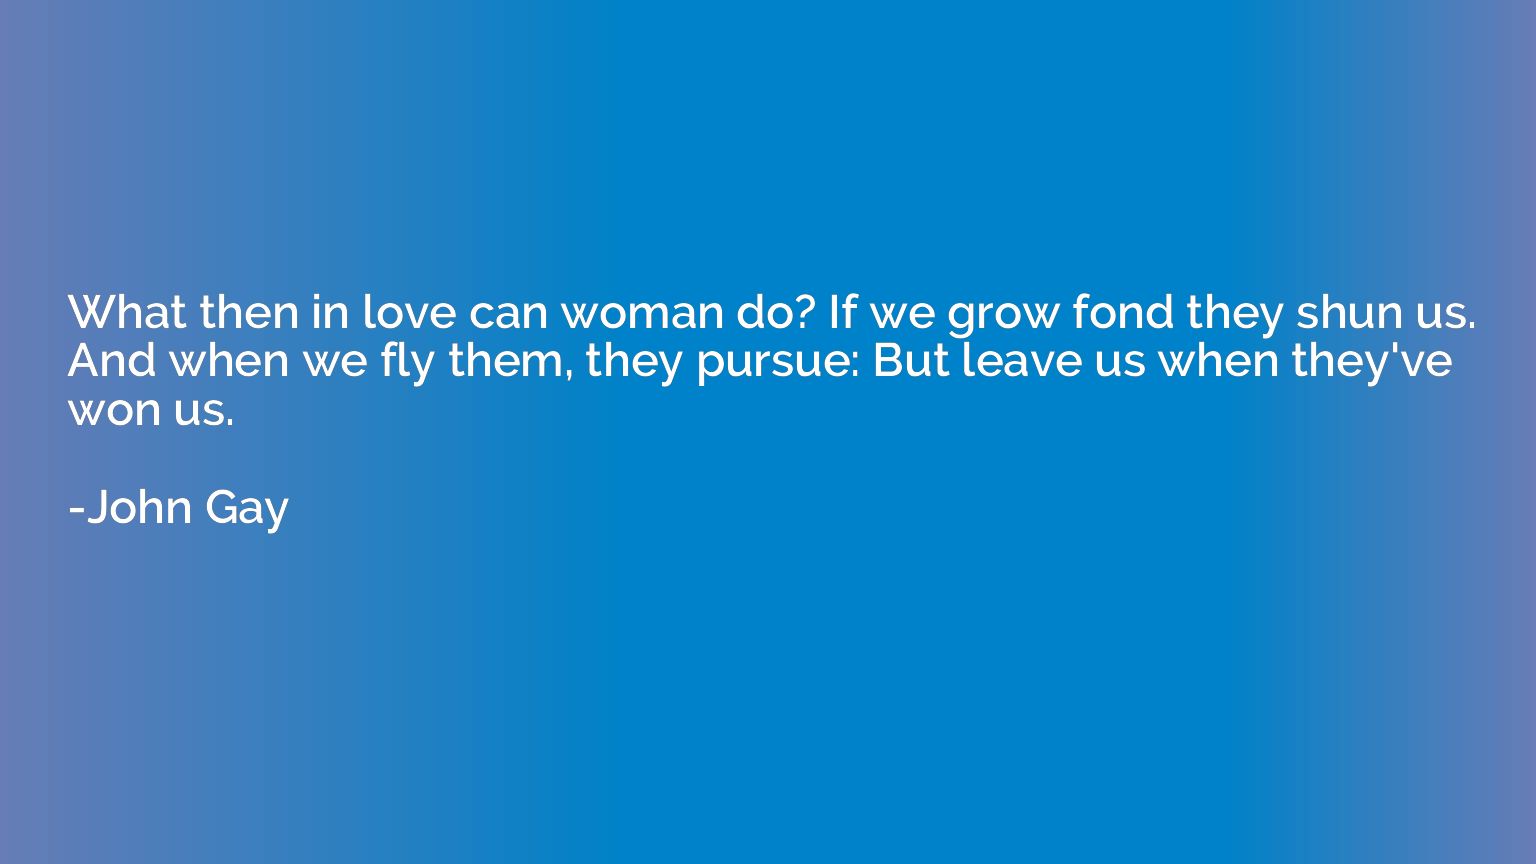 What then in love can woman do? If we grow fond they shun us